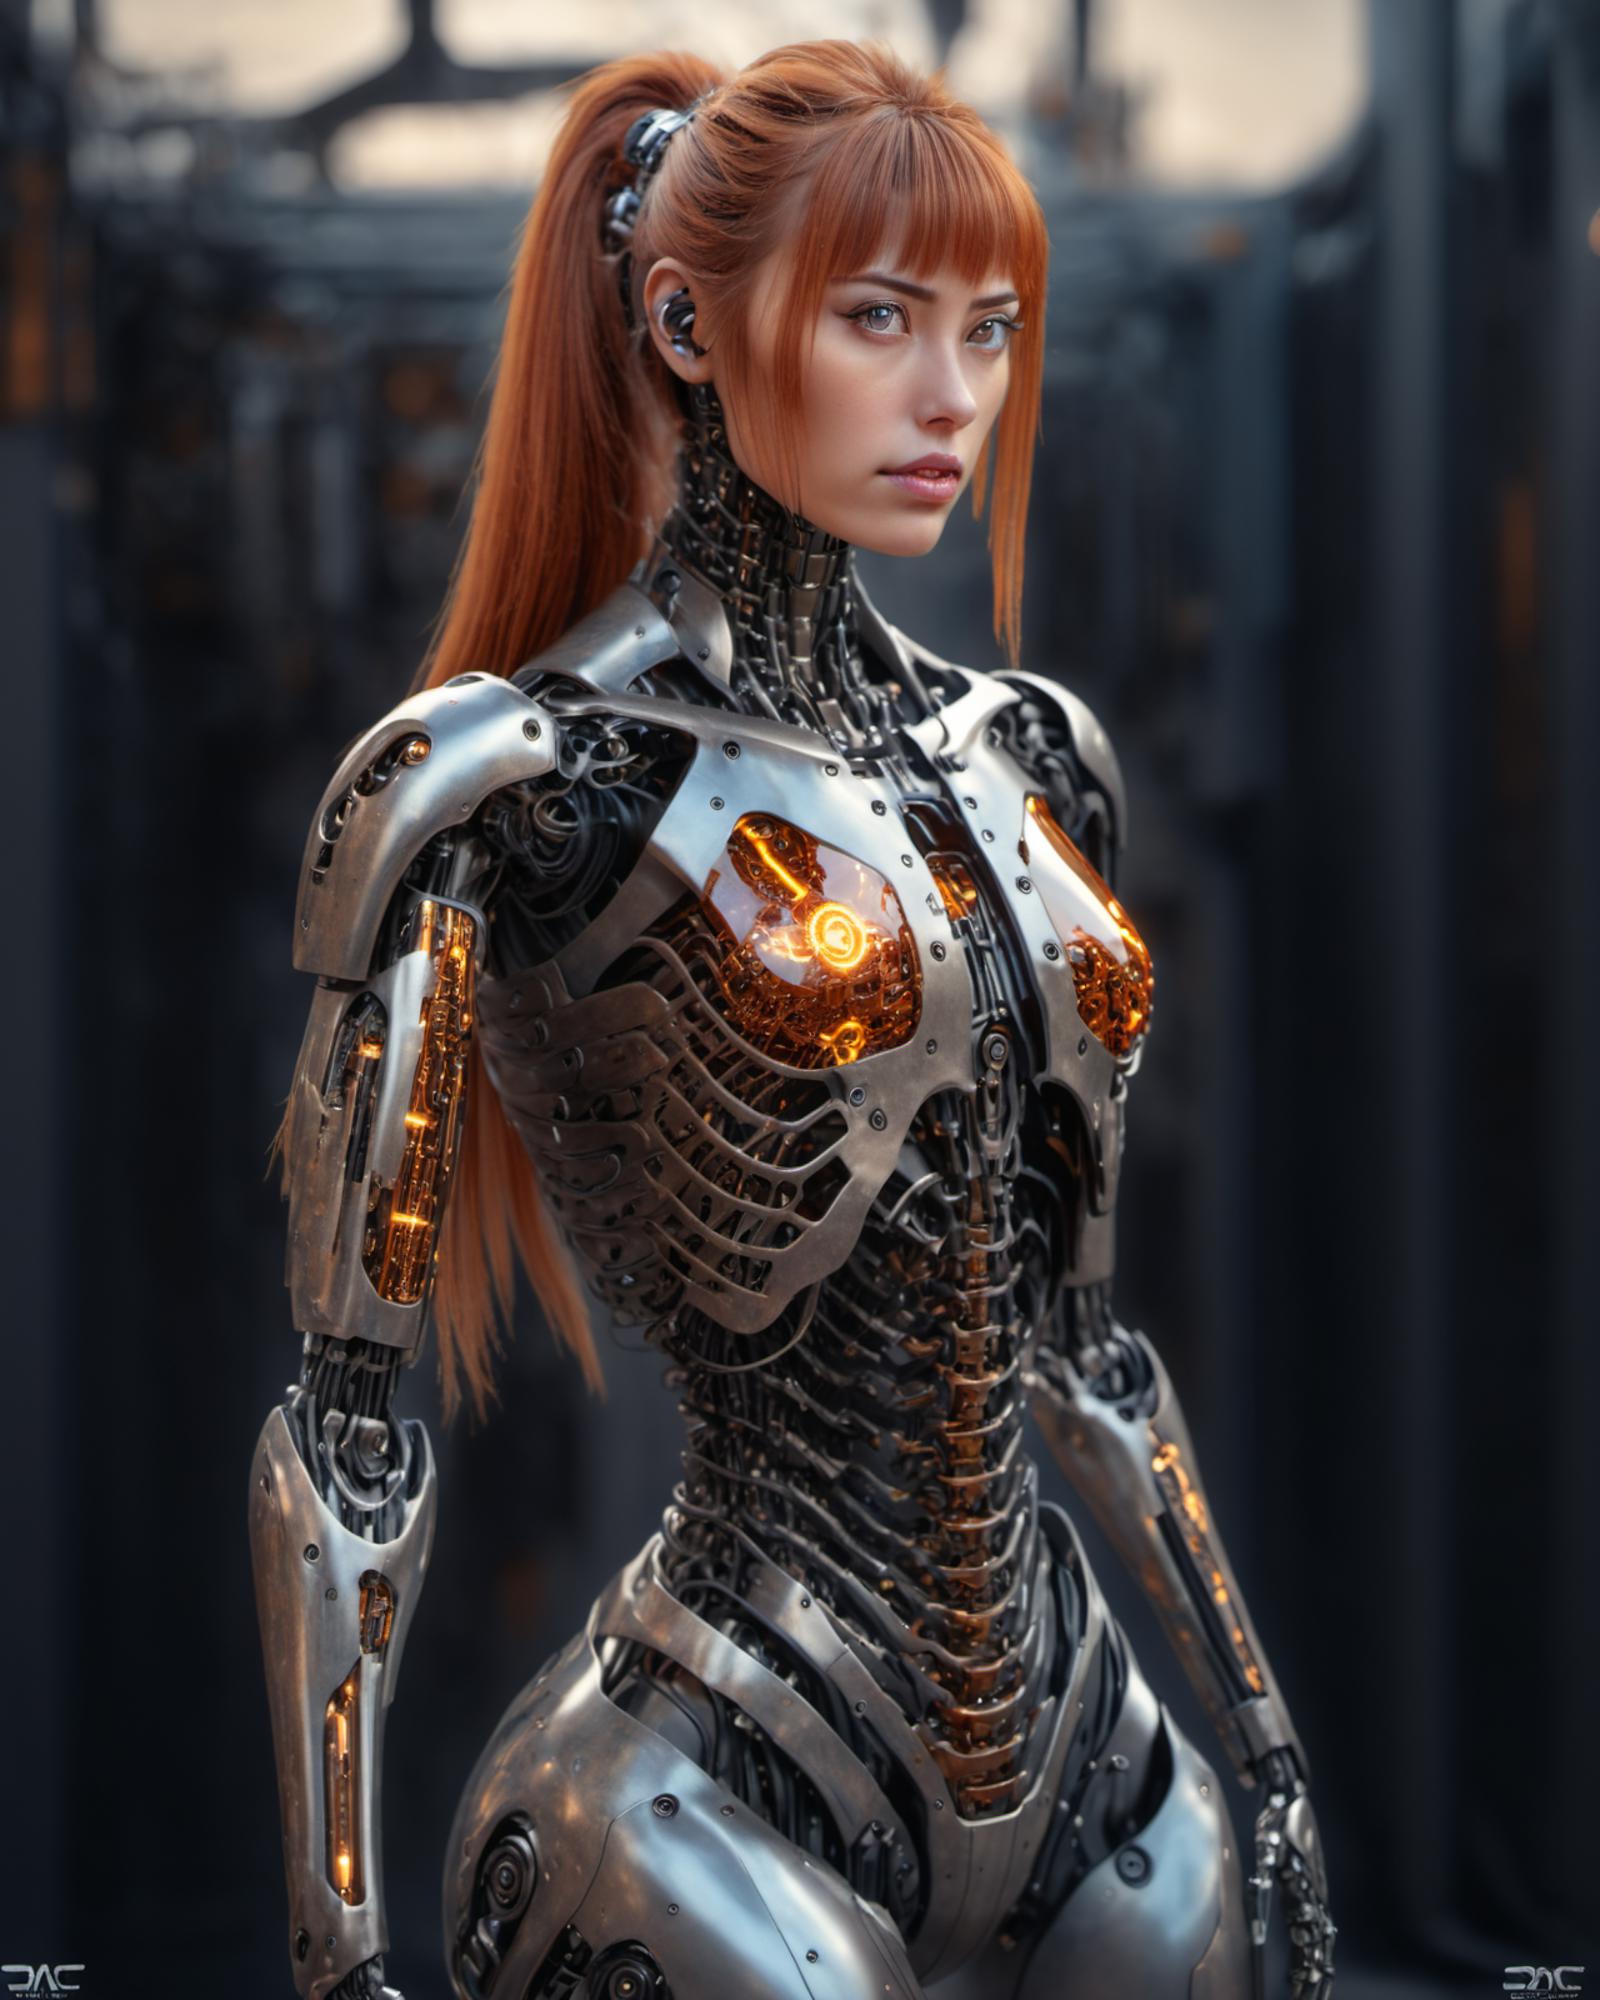 A robotic woman with a metal body and red hair.